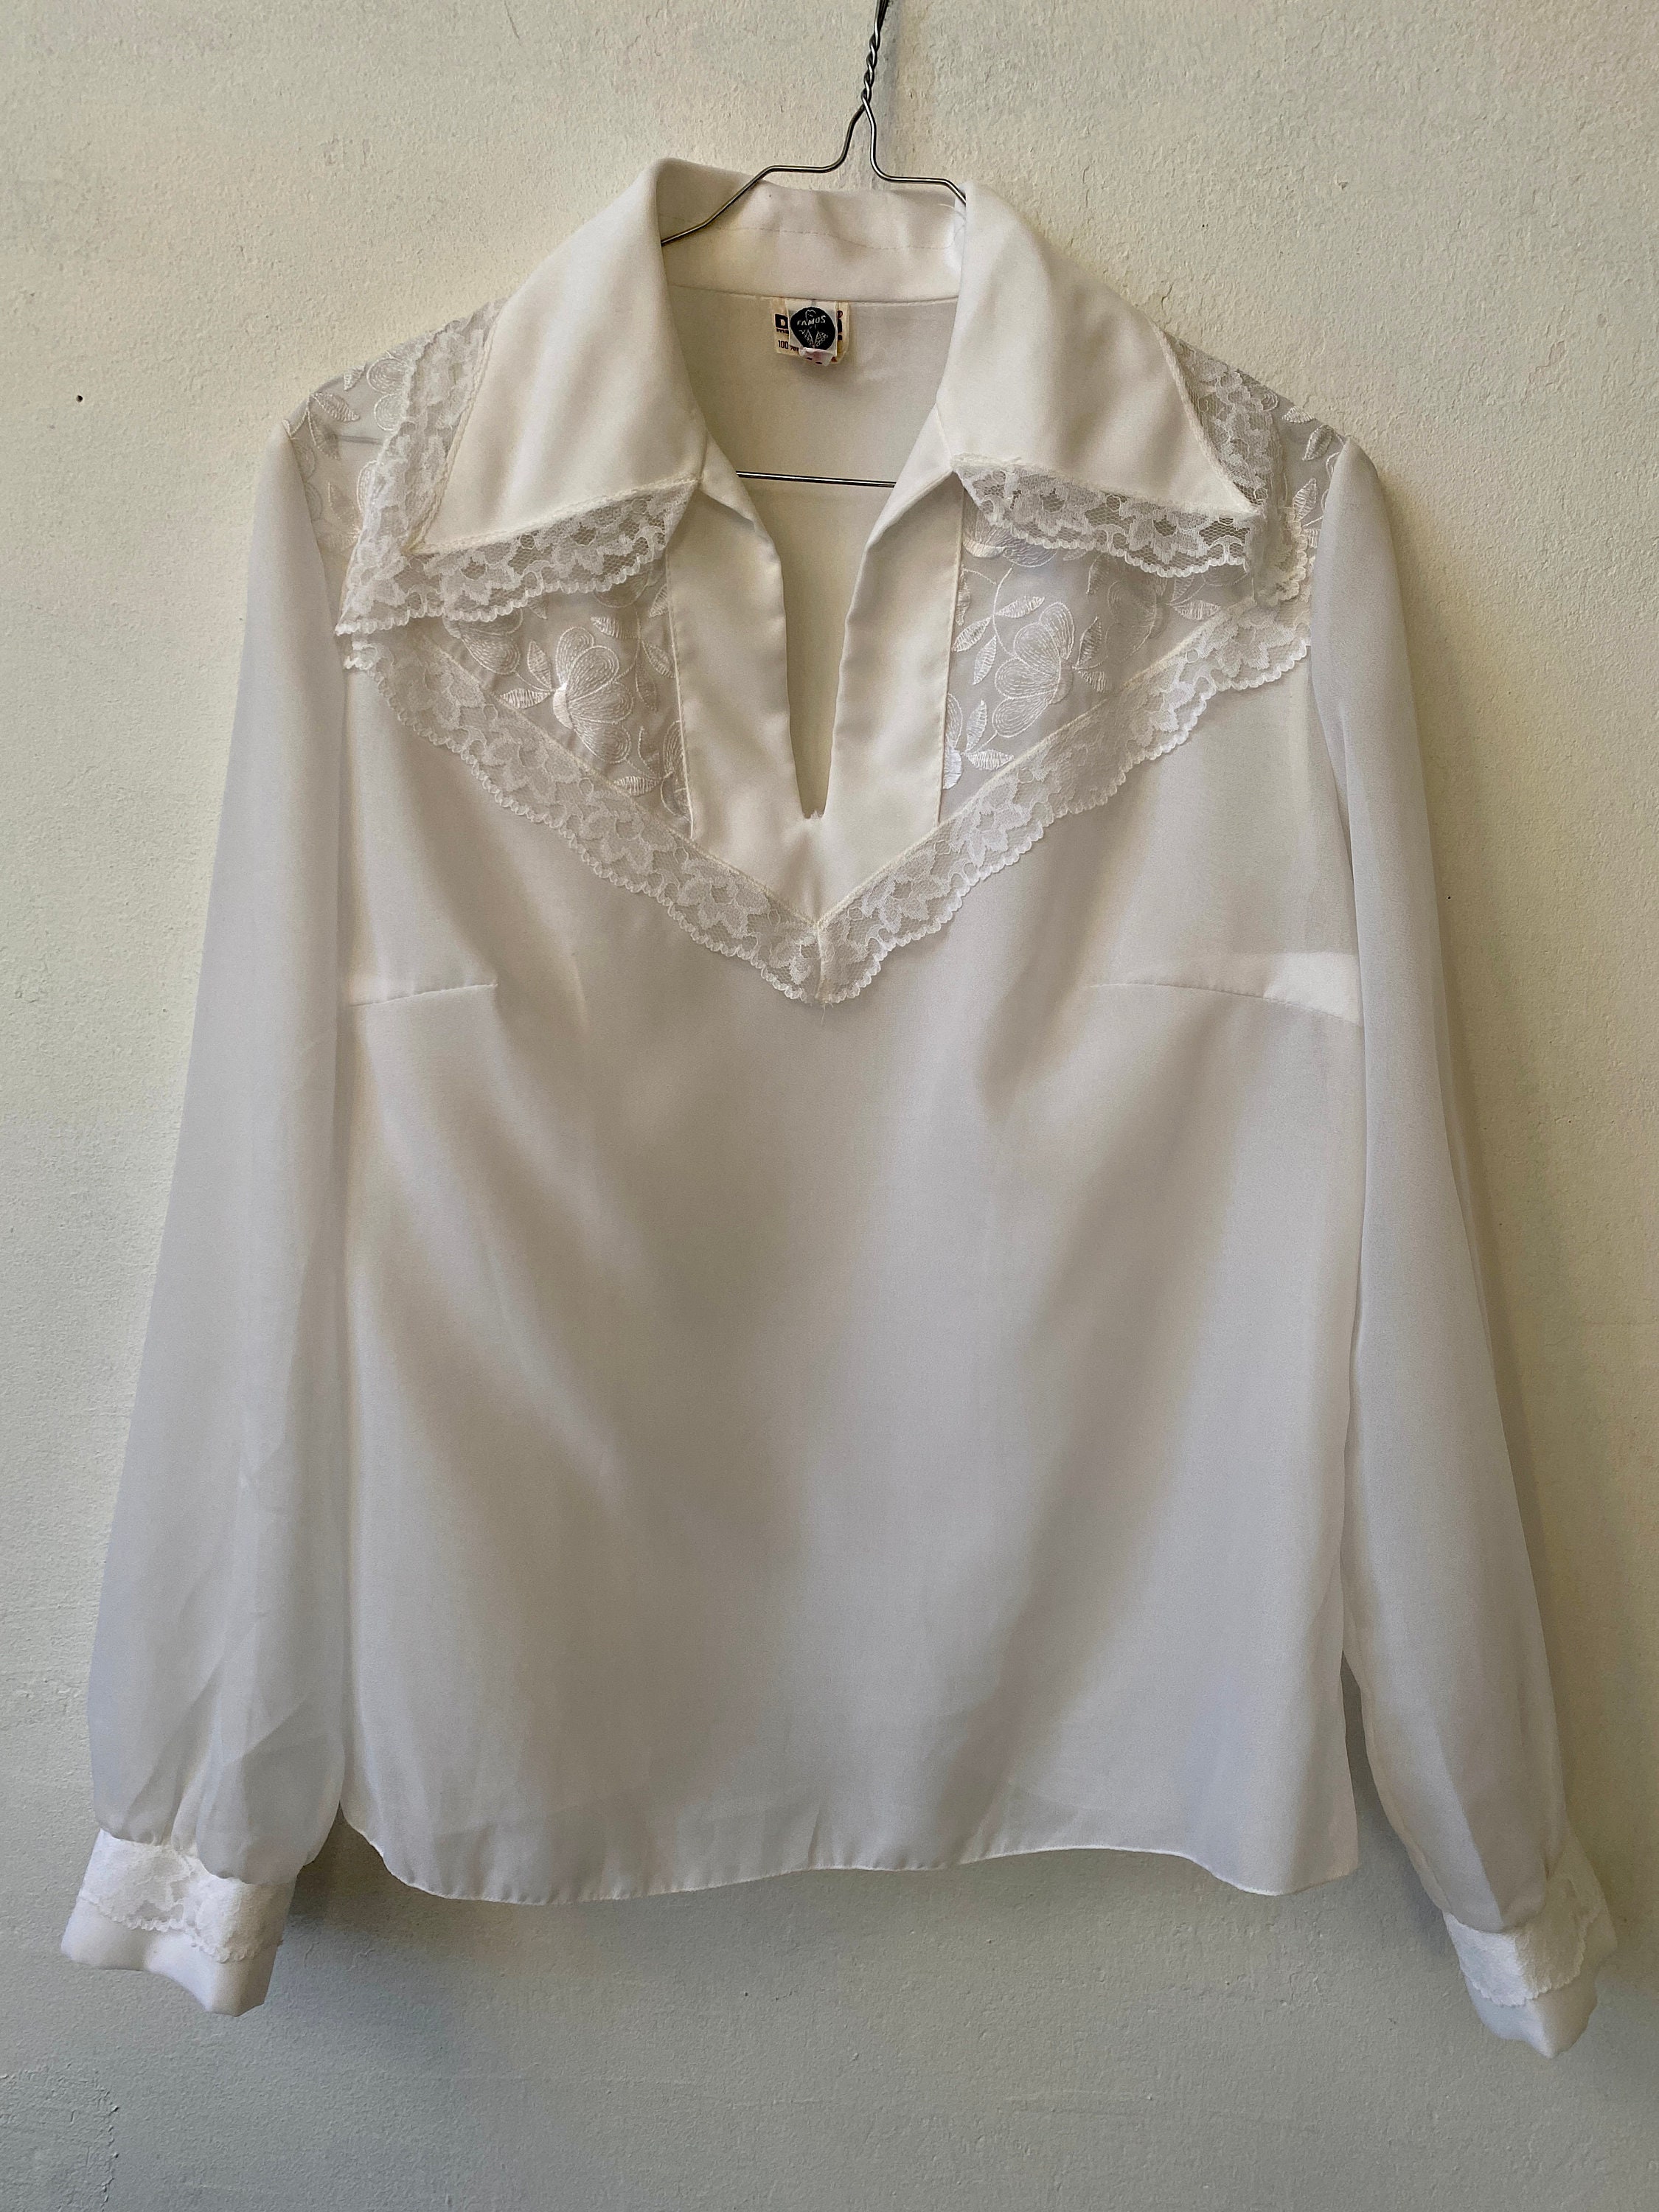 Vintage White Blouse White top with lace trim | Etsy